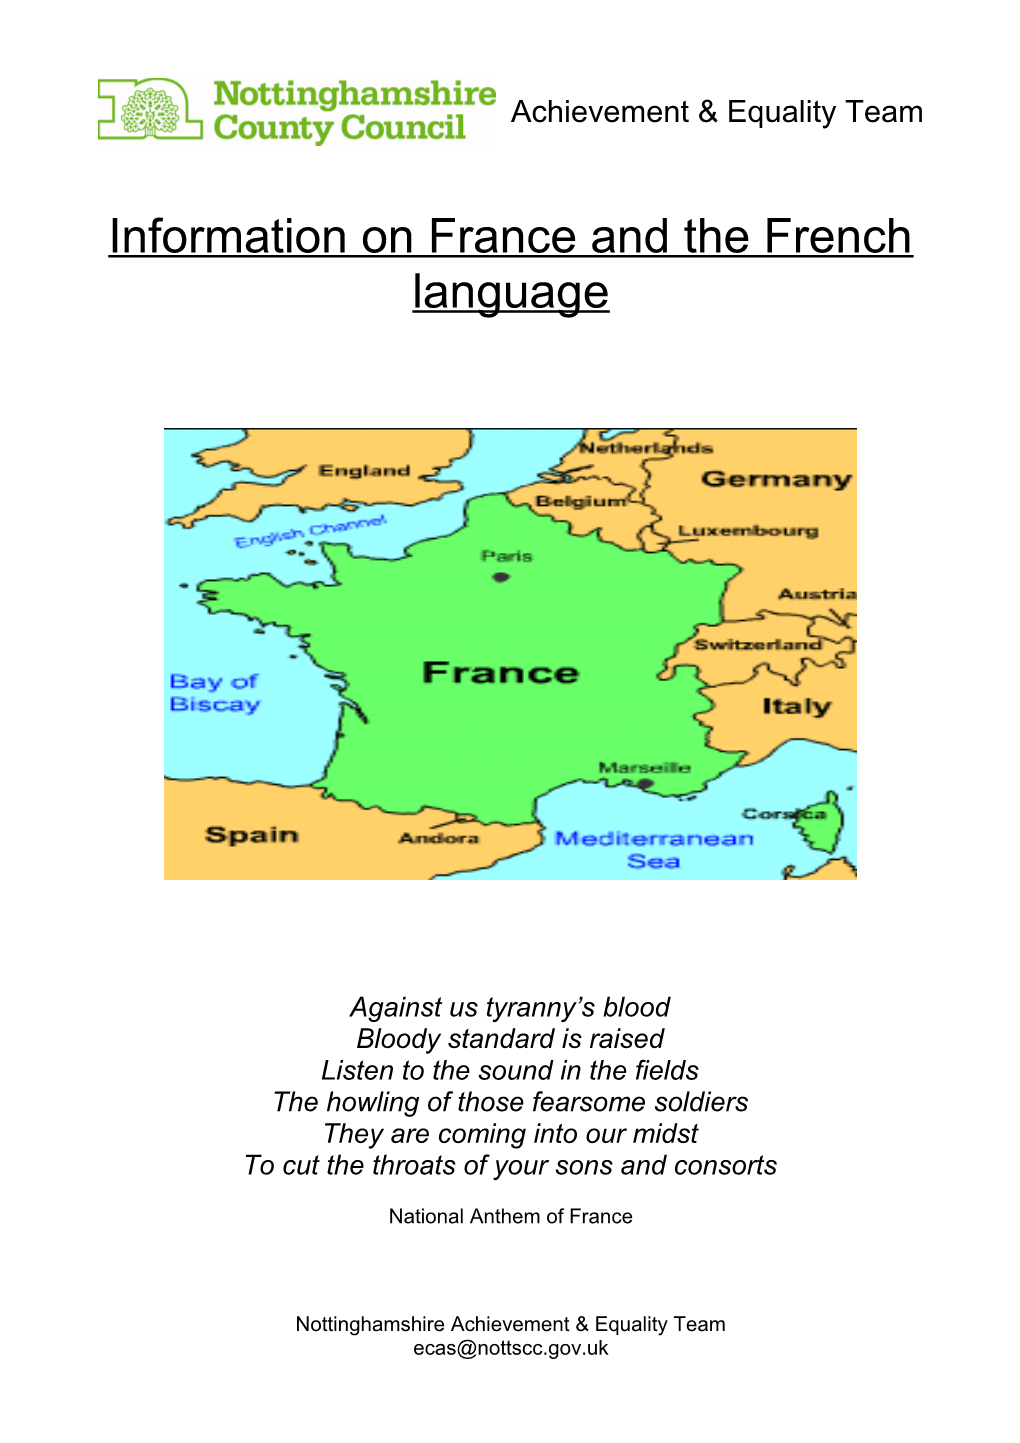 Information on France and the French Language